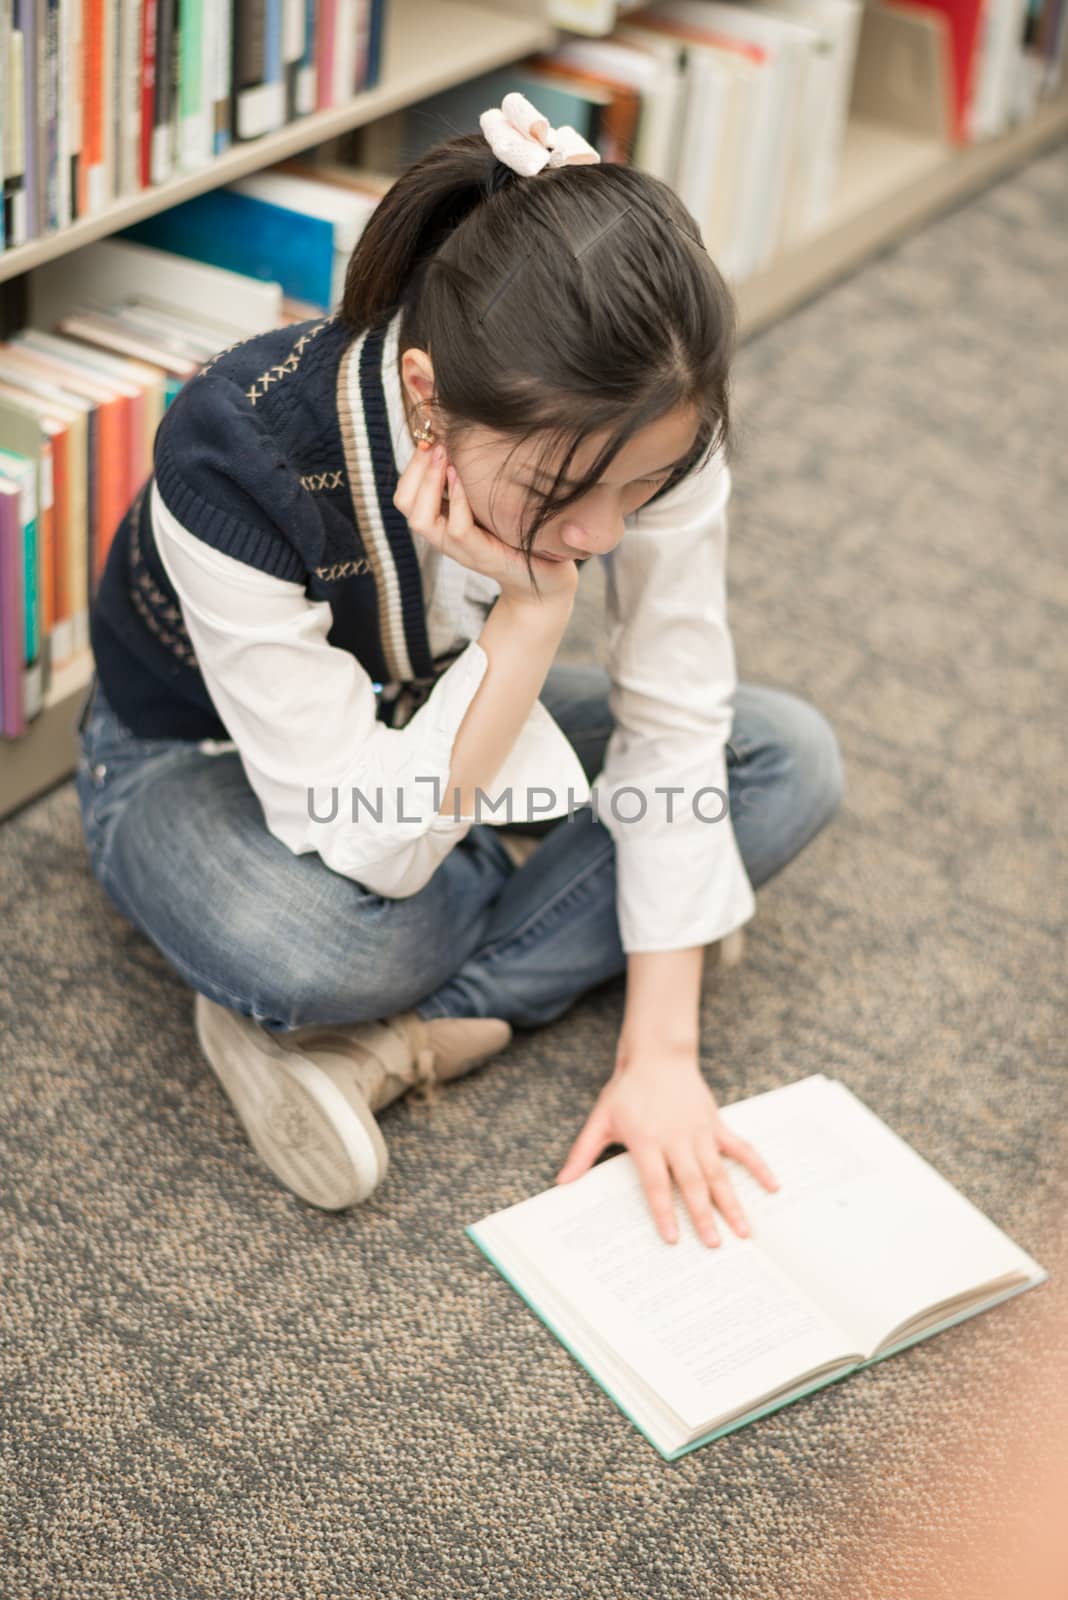 Young attractive woman reading a book while sitting on the floor in front of a bookshelf